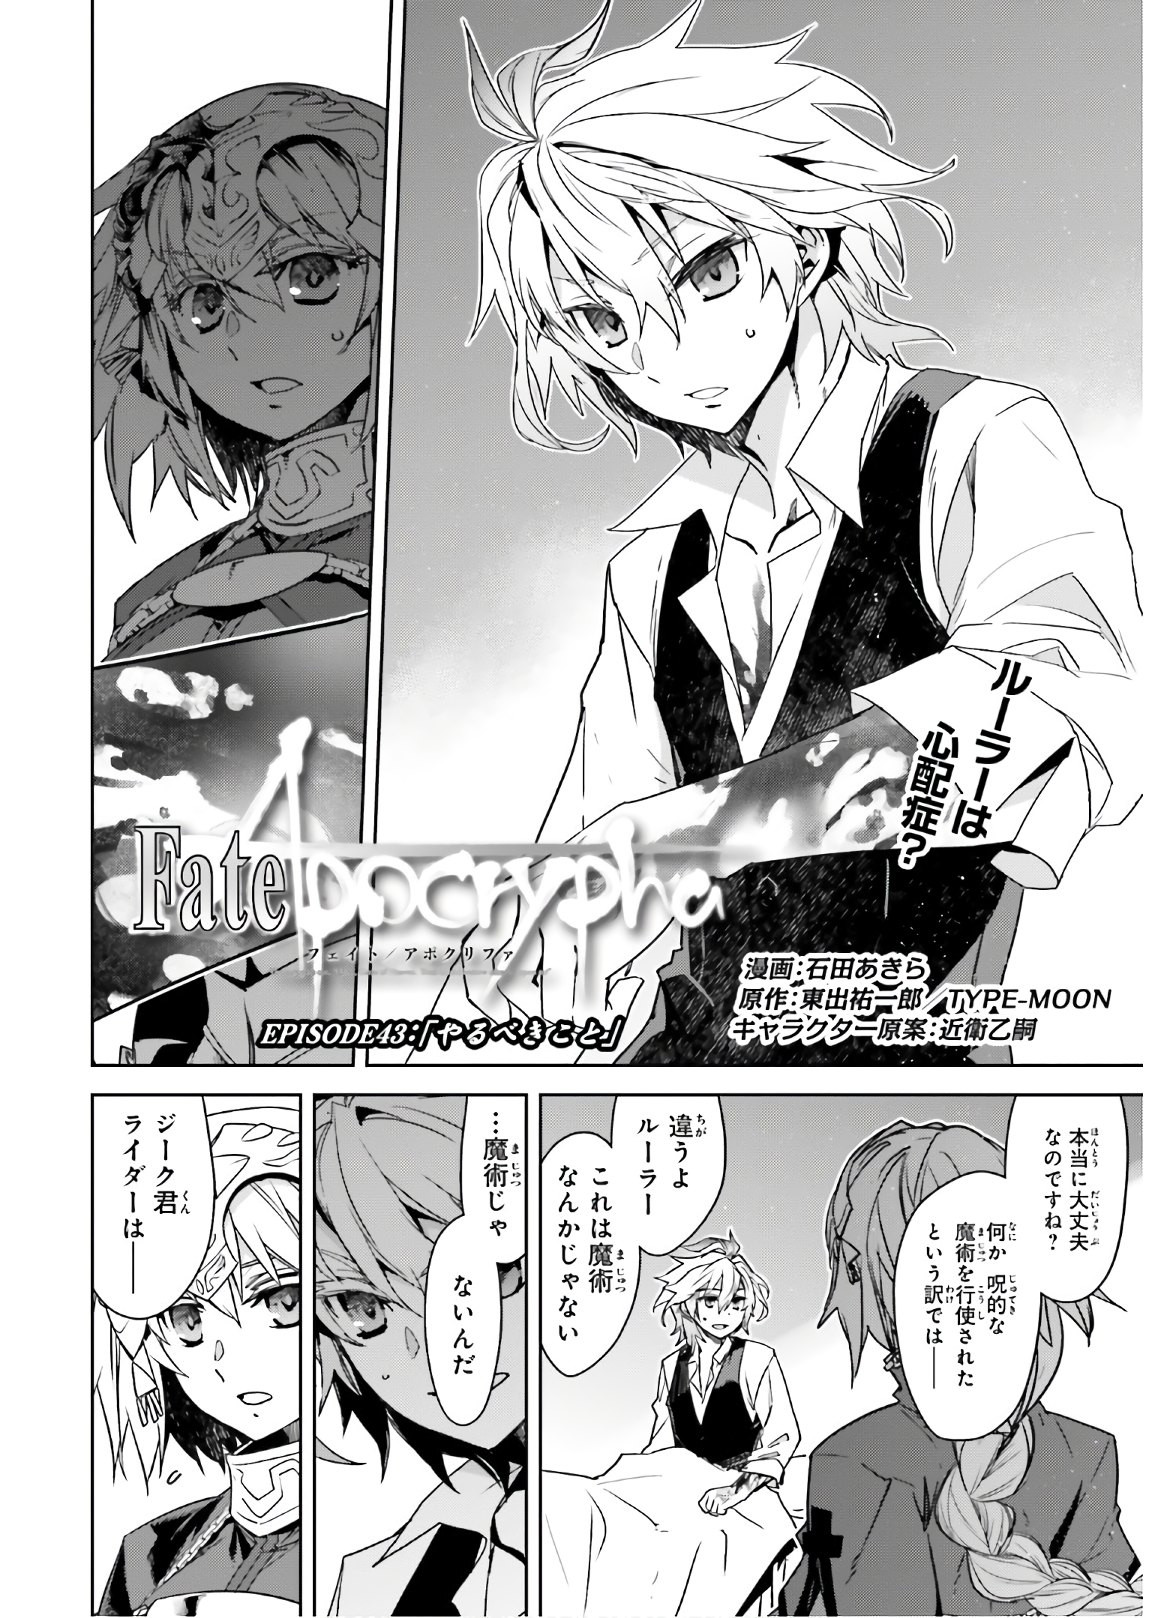 Fate-Apocrypha - Chapter 43 - Page 2